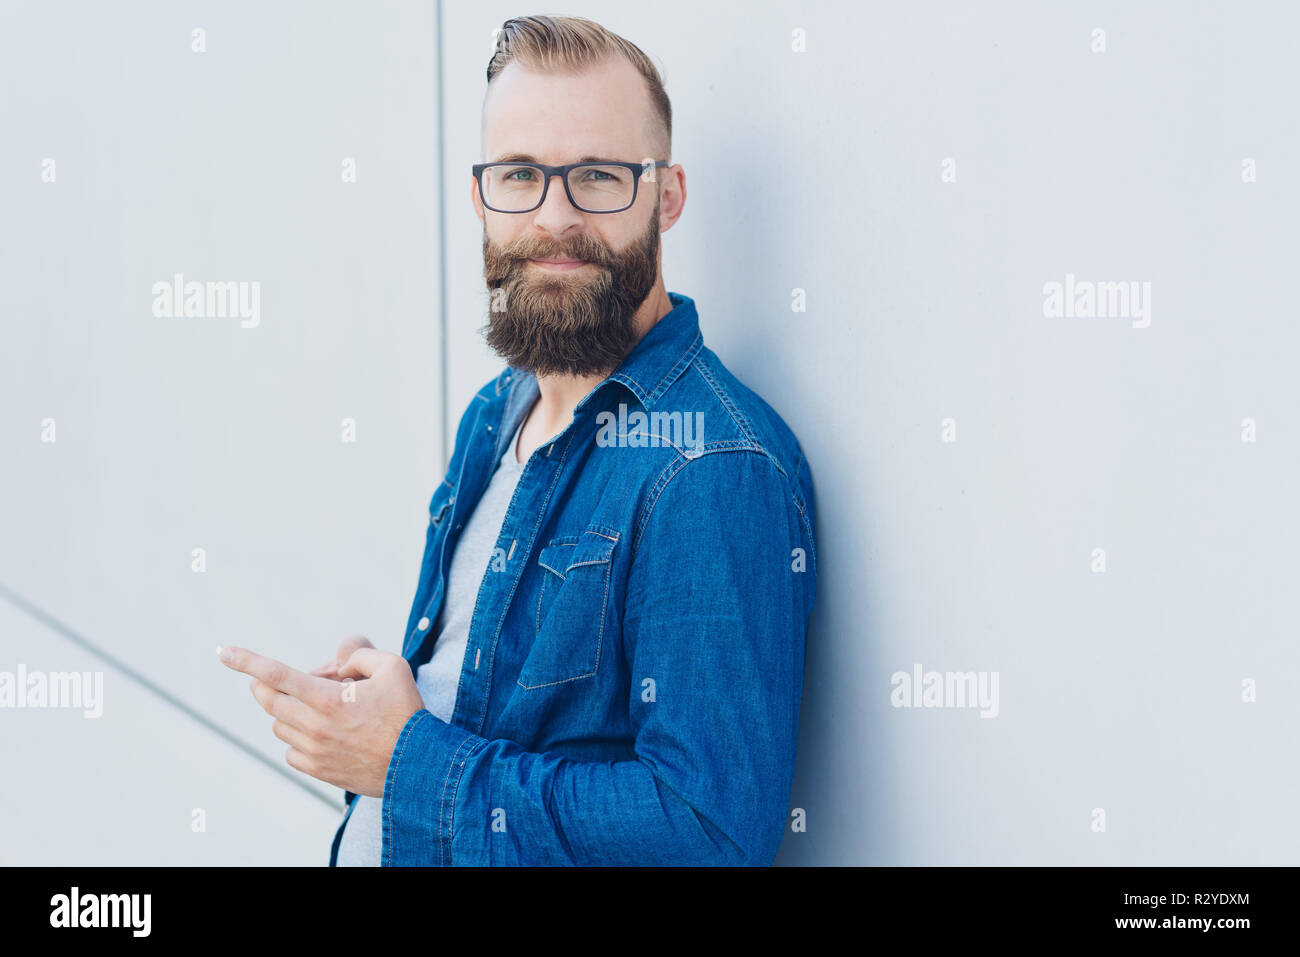 Hipster Young Man With Short Haircut And Beard Wearing Glasses